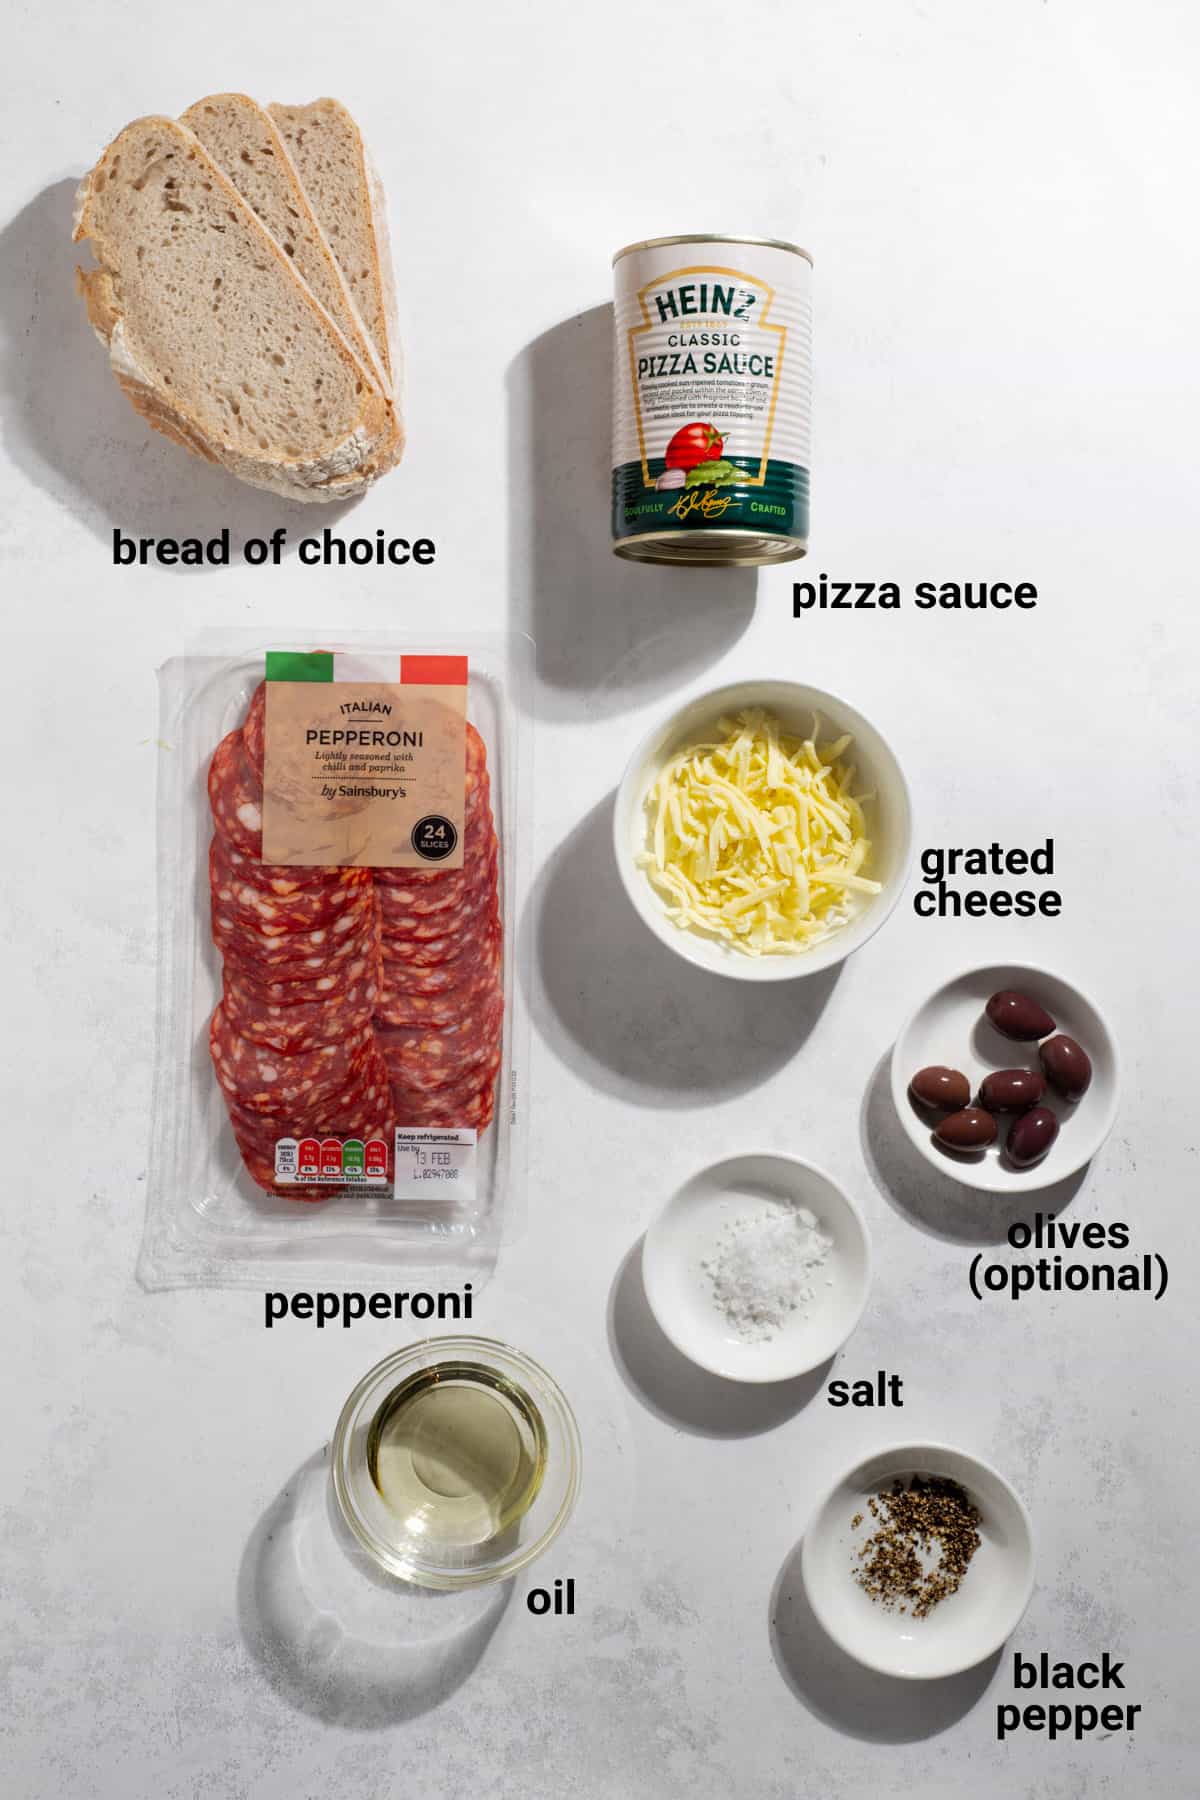 Pepperoni pizza toast ingredients.